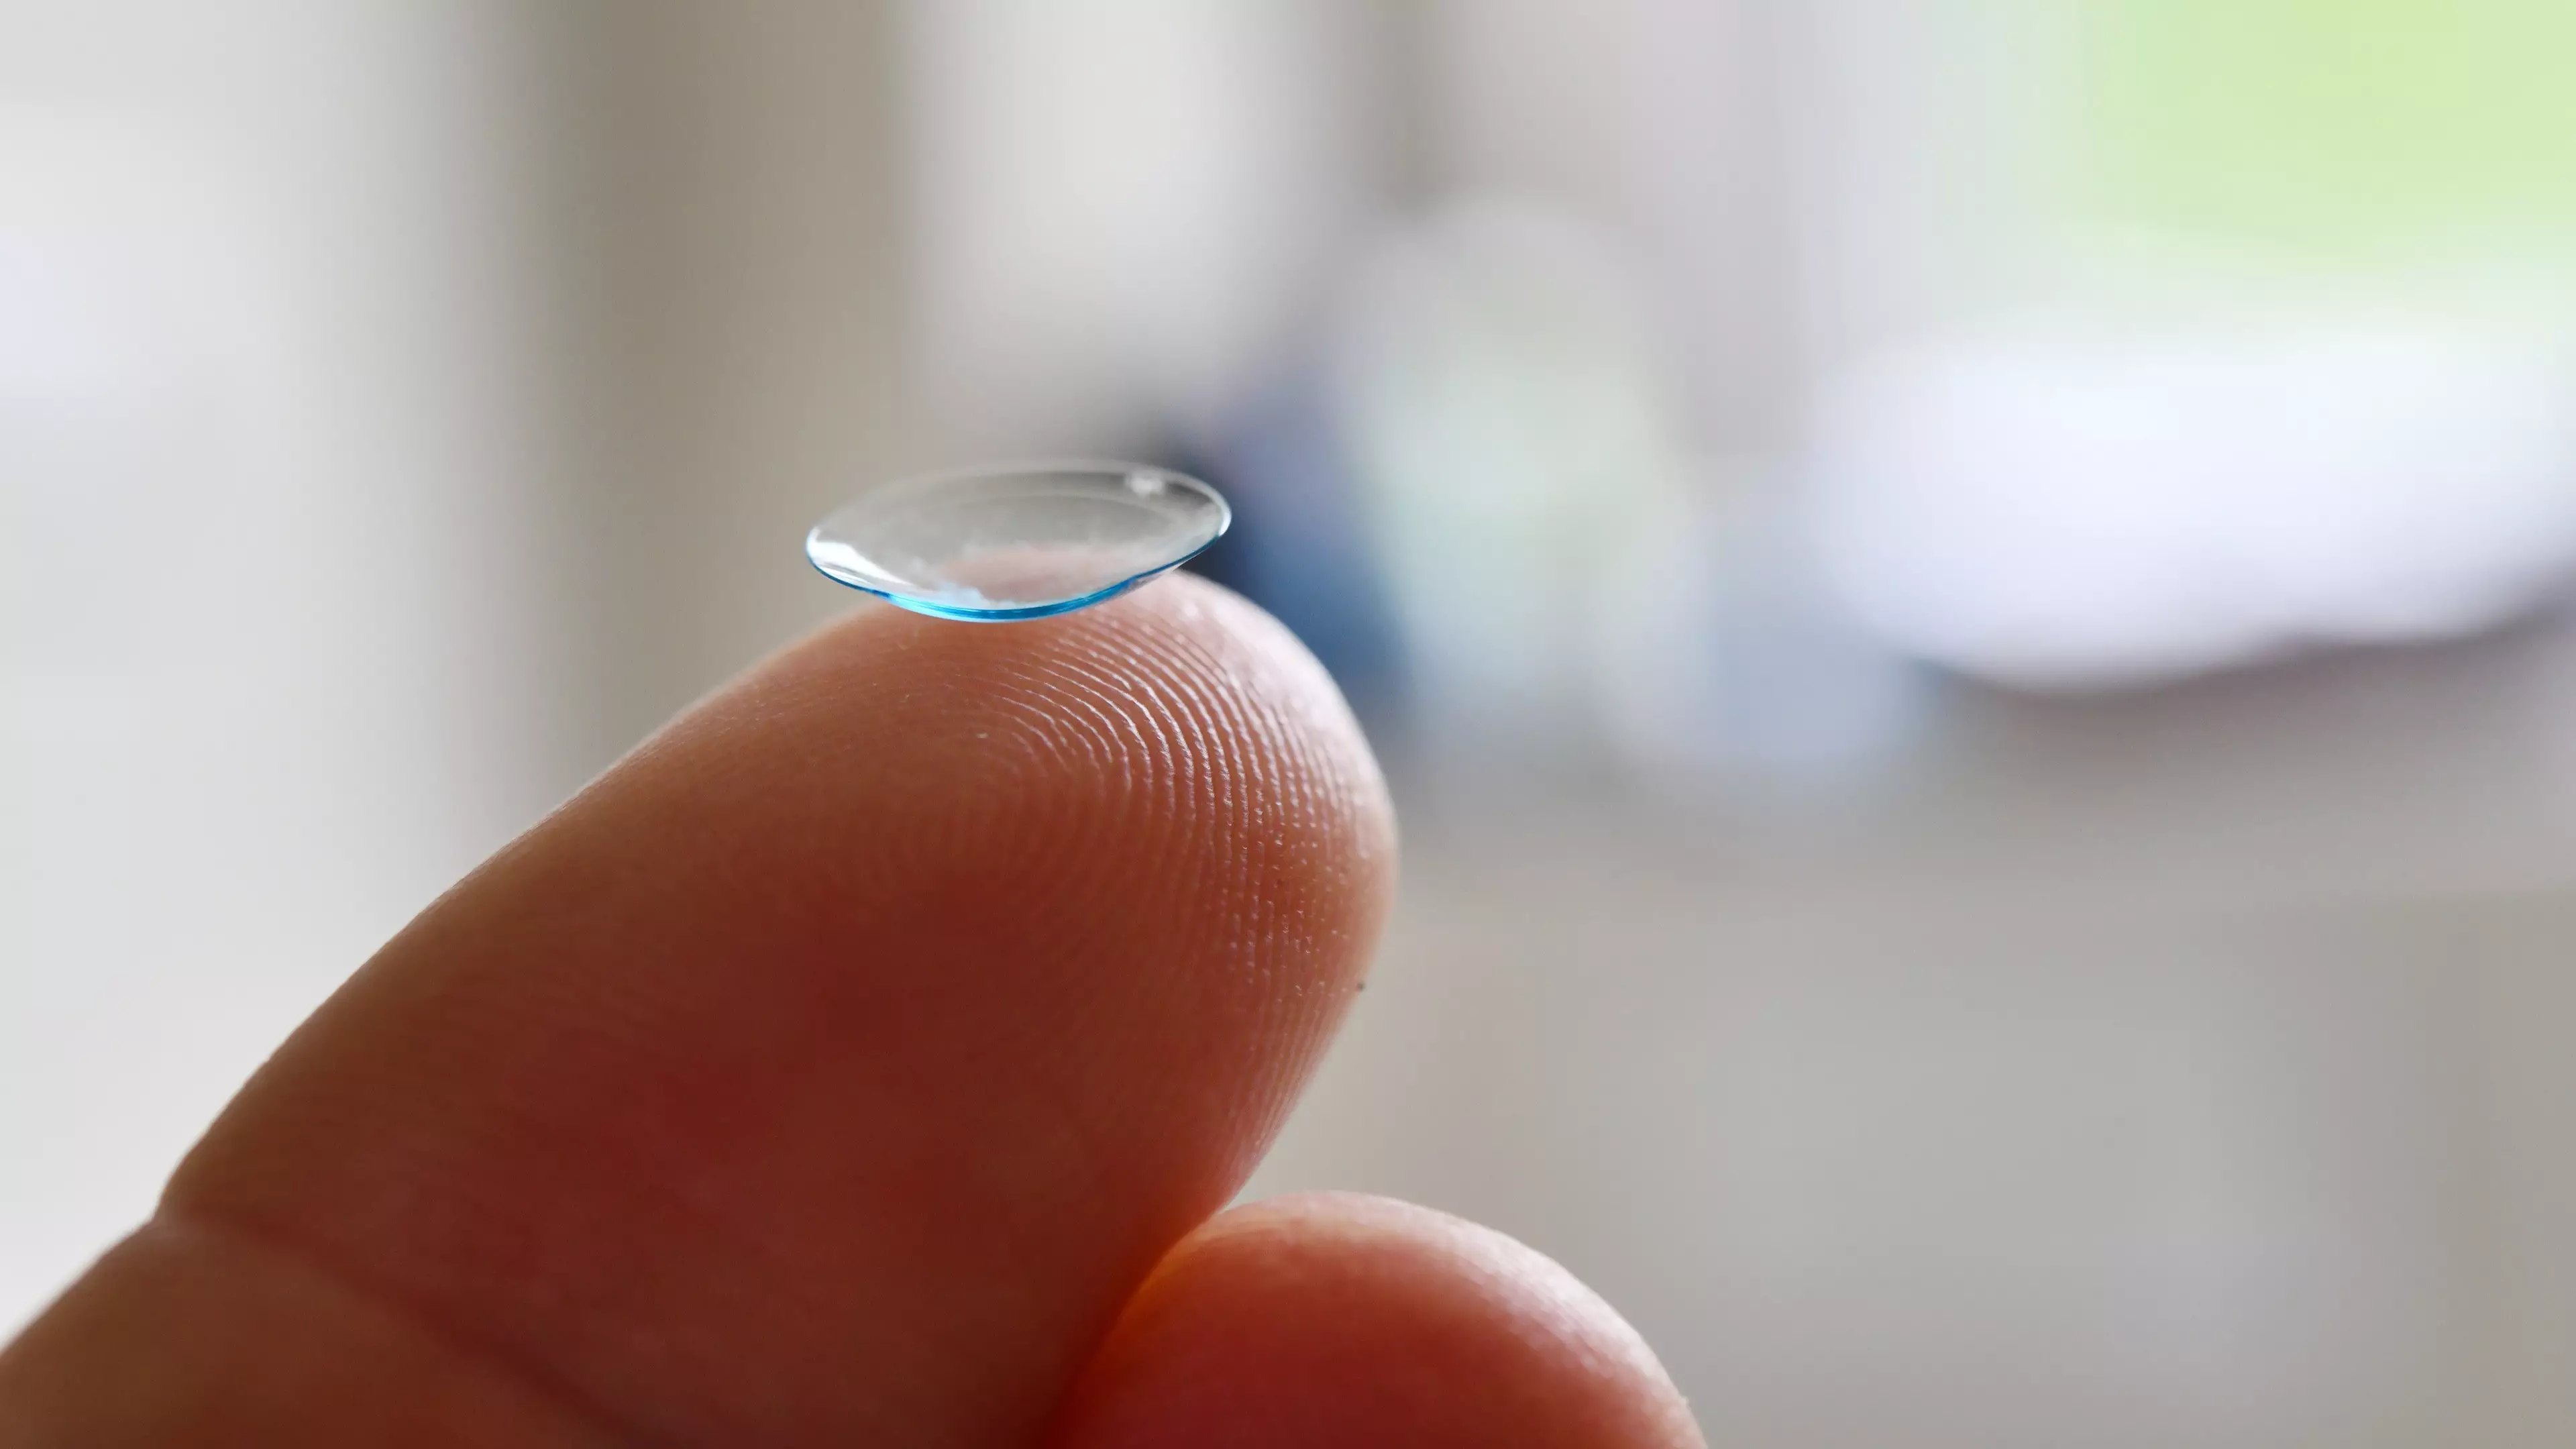 Study Reports Increase In Virus That Can Cause Blindness In Contact Lens Wearers